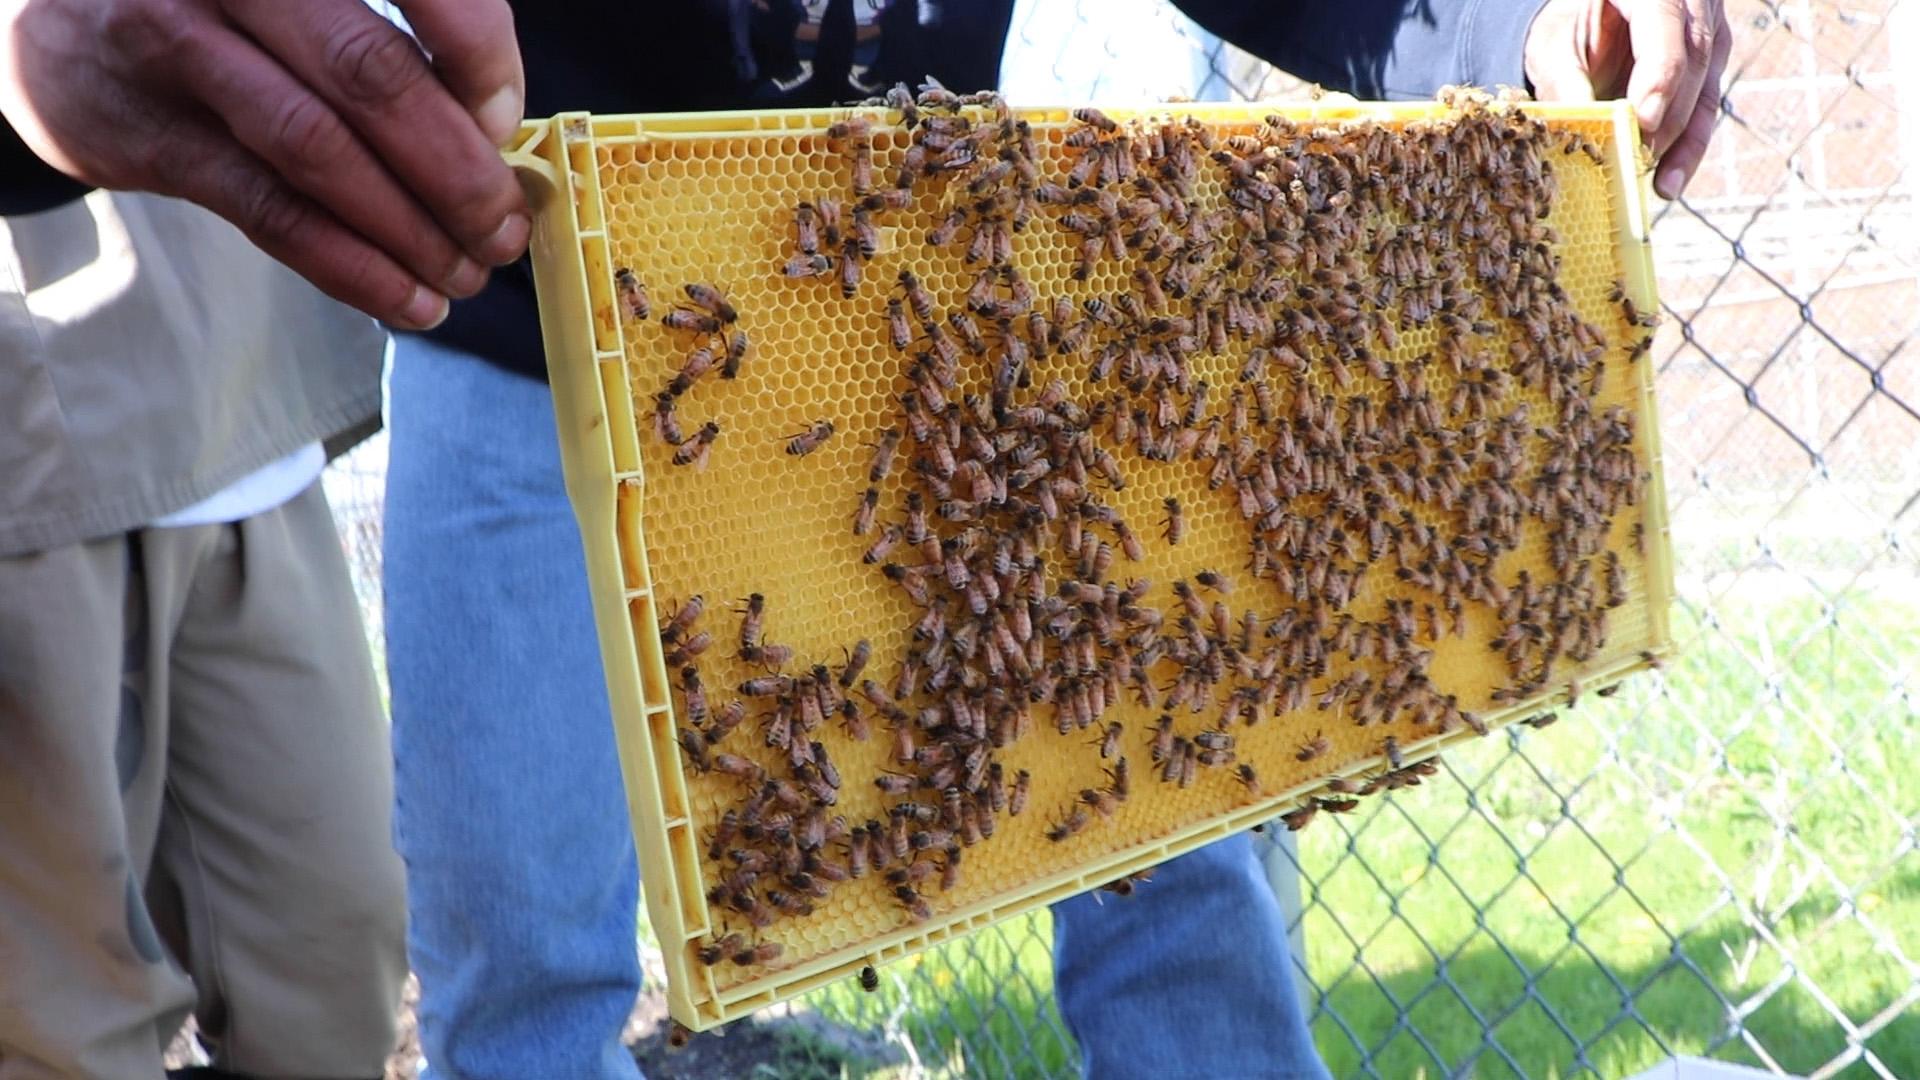 A frame of Italian honeybees, a docile, productive type of bee suitable for novices to beekeeping, according to beekeeper Thad Smith. (Evan Garcia / WTTW)